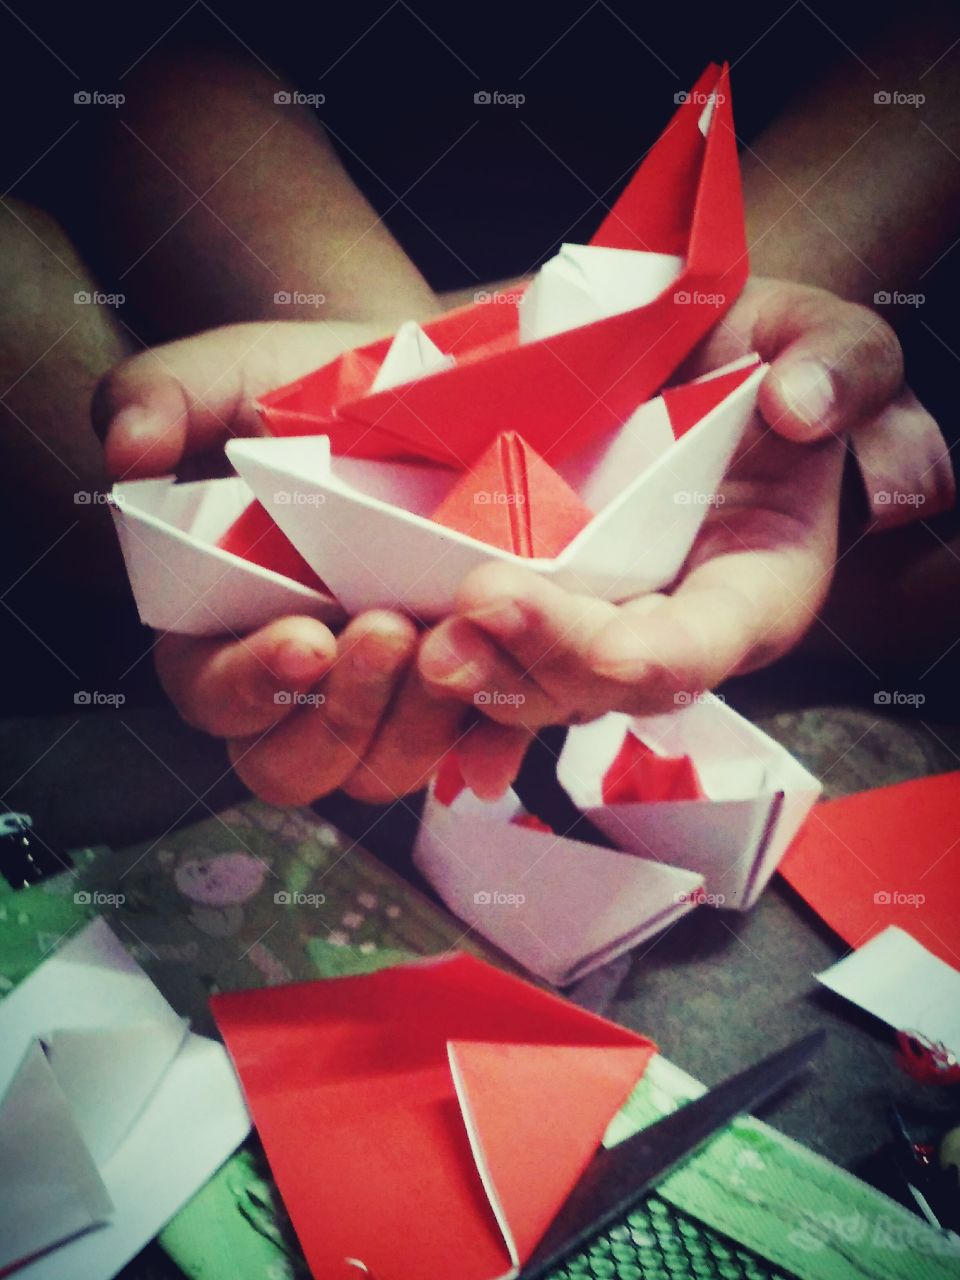 Every child connects with these paper boats❤